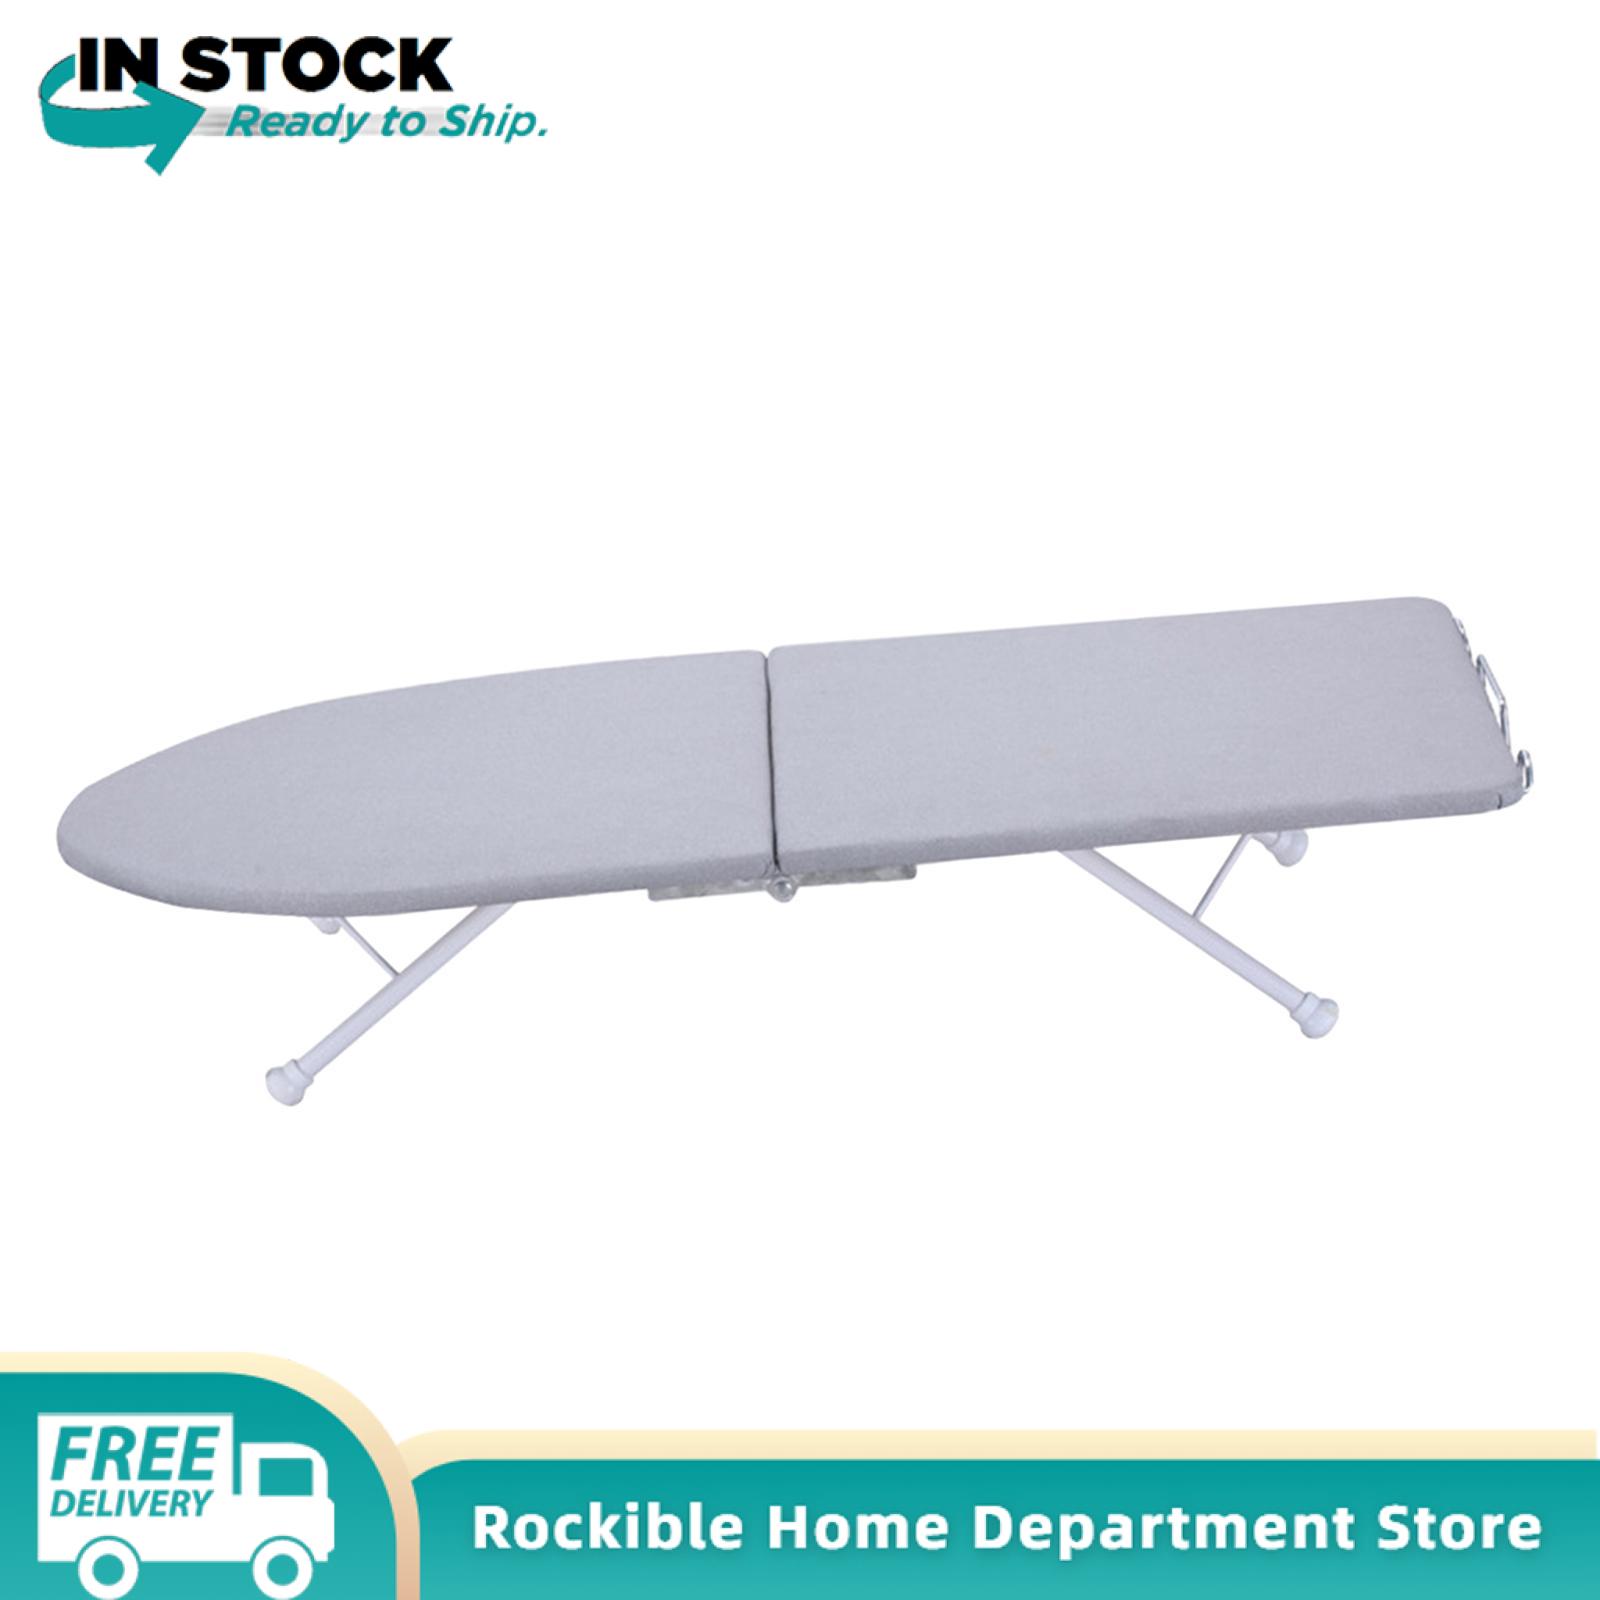 rockible Small Ironing Board, Portable Tabletop Iron Board with Anti Slip